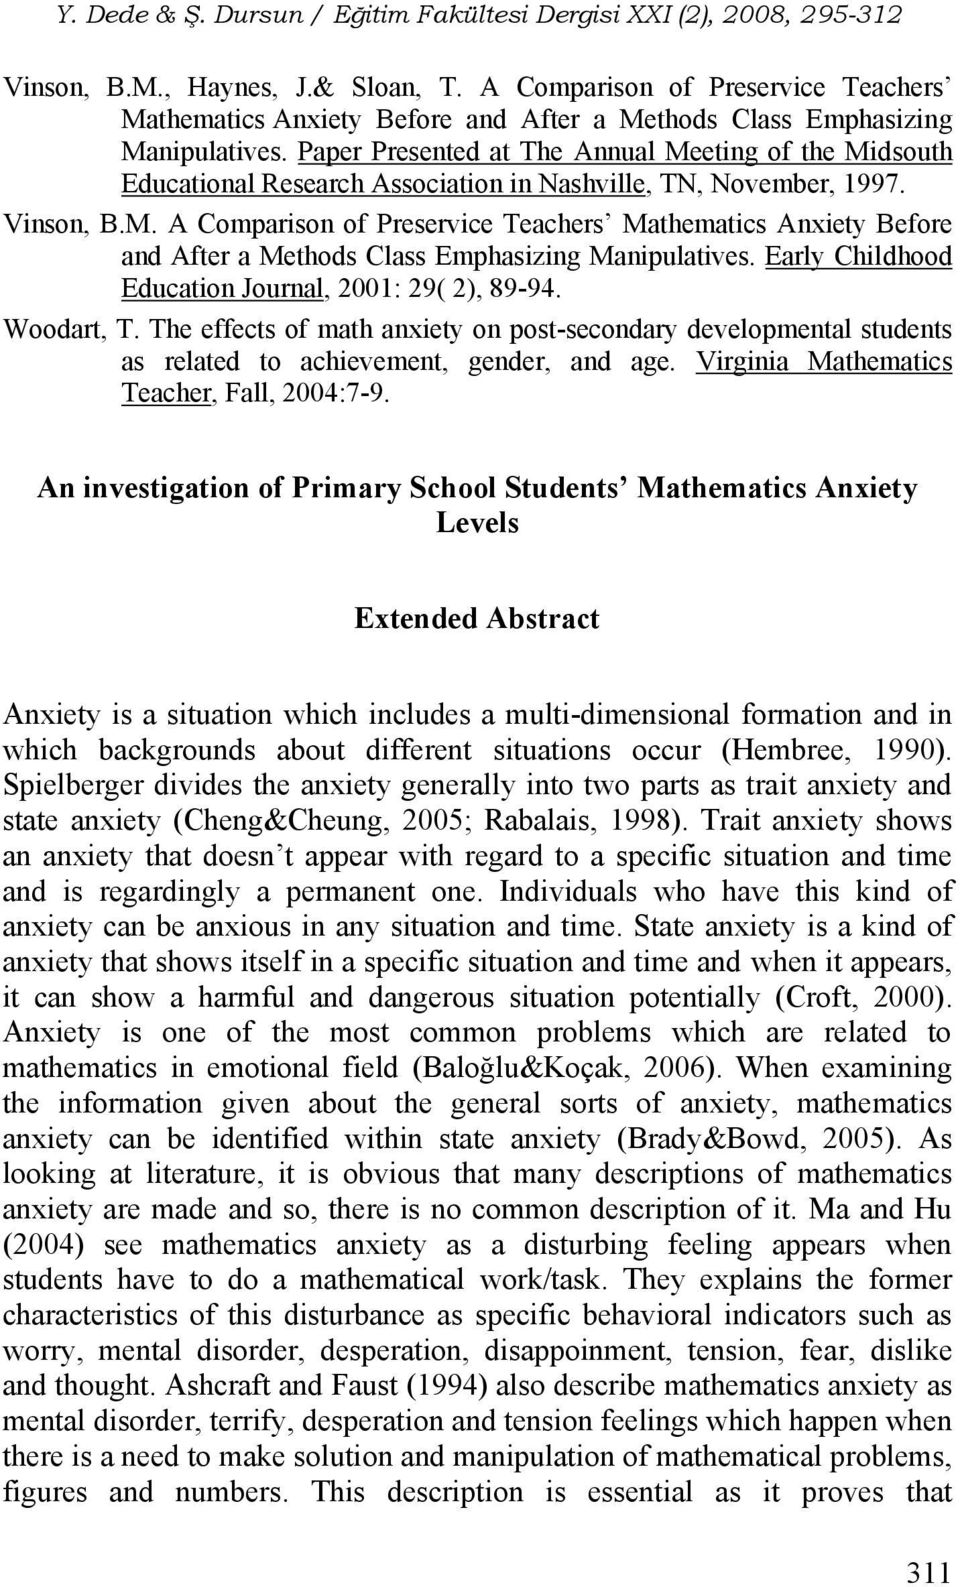 Early Childhood Education Journal, 2001: 29( 2), 89-94. Woodart, T. The effects of math anxiety on post-secondary developmental students as related to achievement, gender, and age.